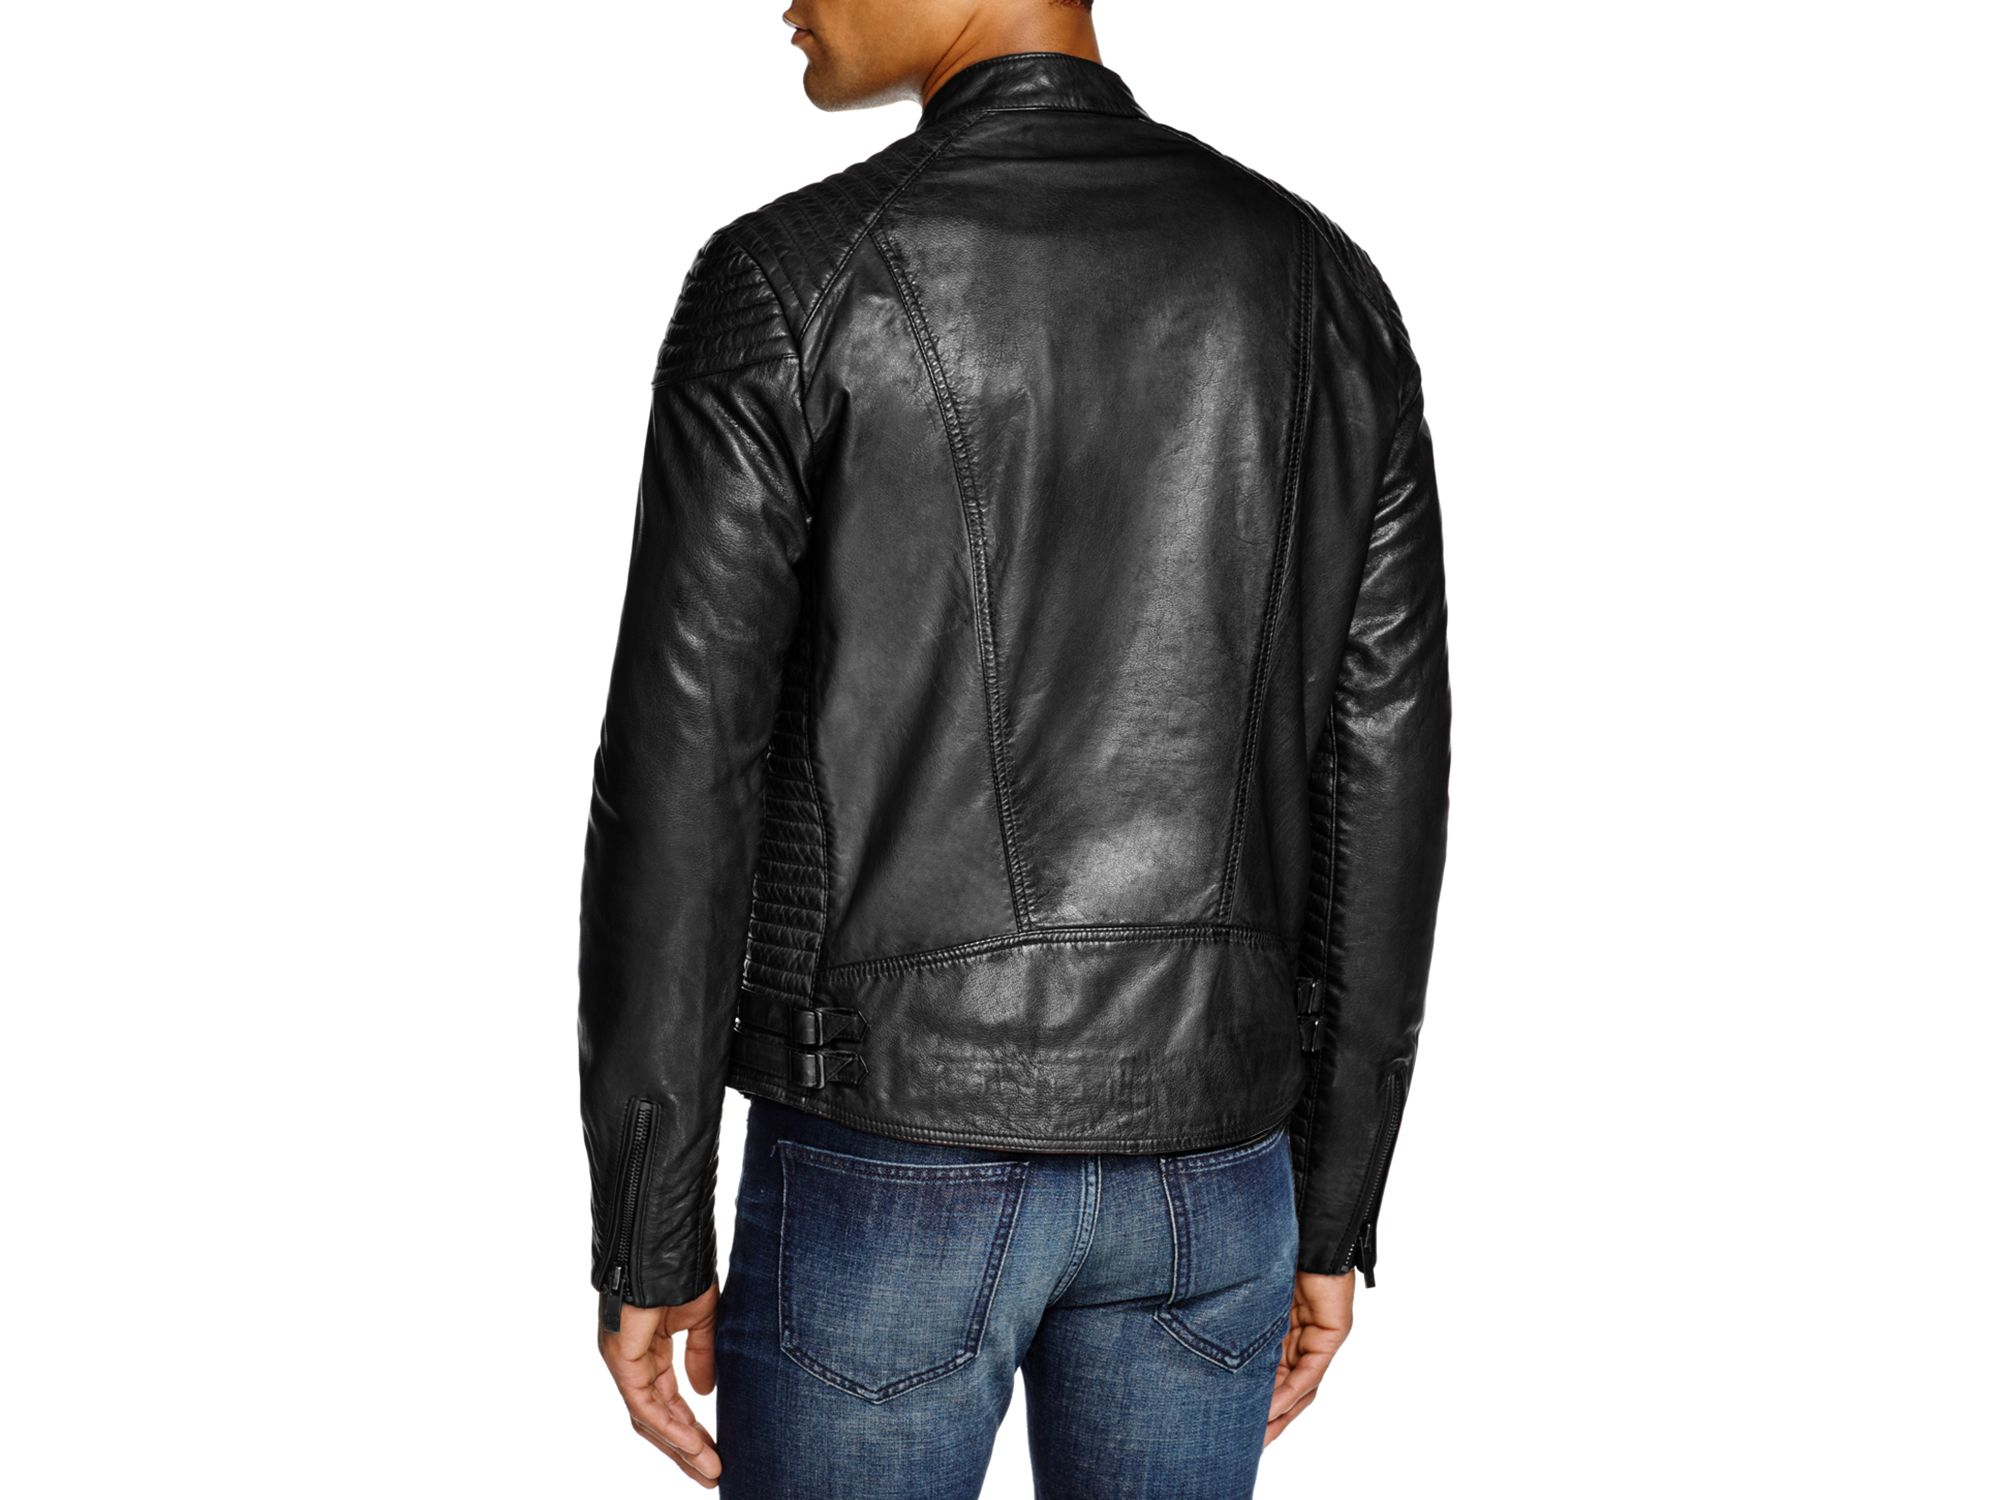 15 Black Scotch and soda fitted leather jacket with Slim Fit